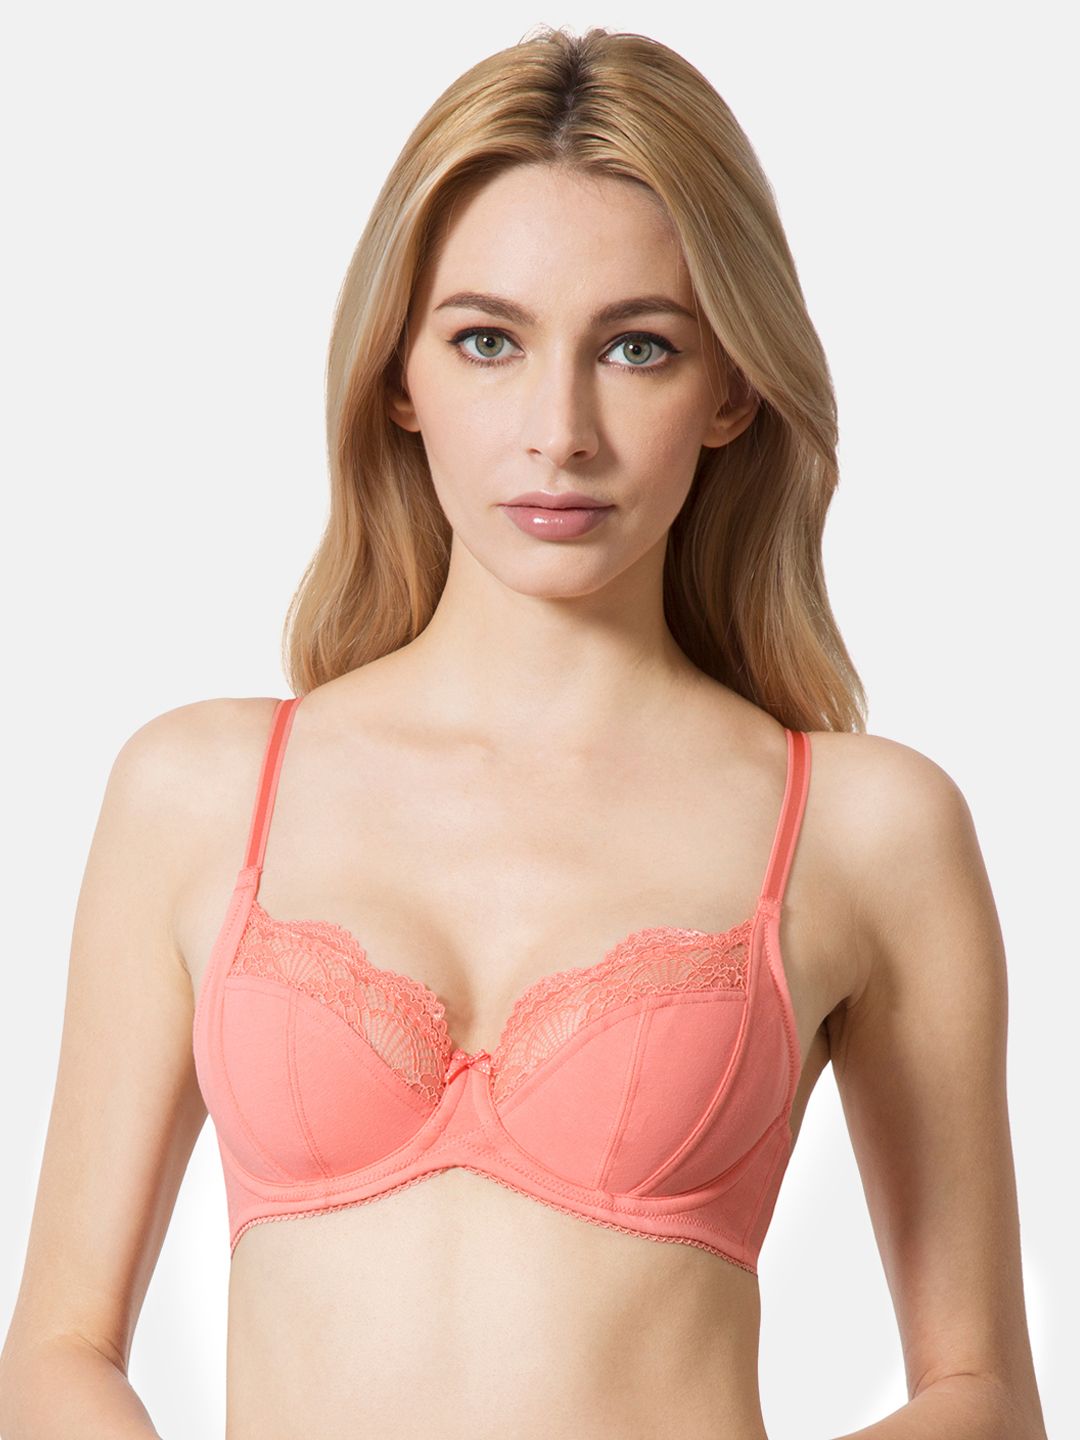 Van Heusen Pink Solid Underwired Non Padded Wired Lace Tipped Balconette Bra ILIBRACSSWW3511009 Price in India